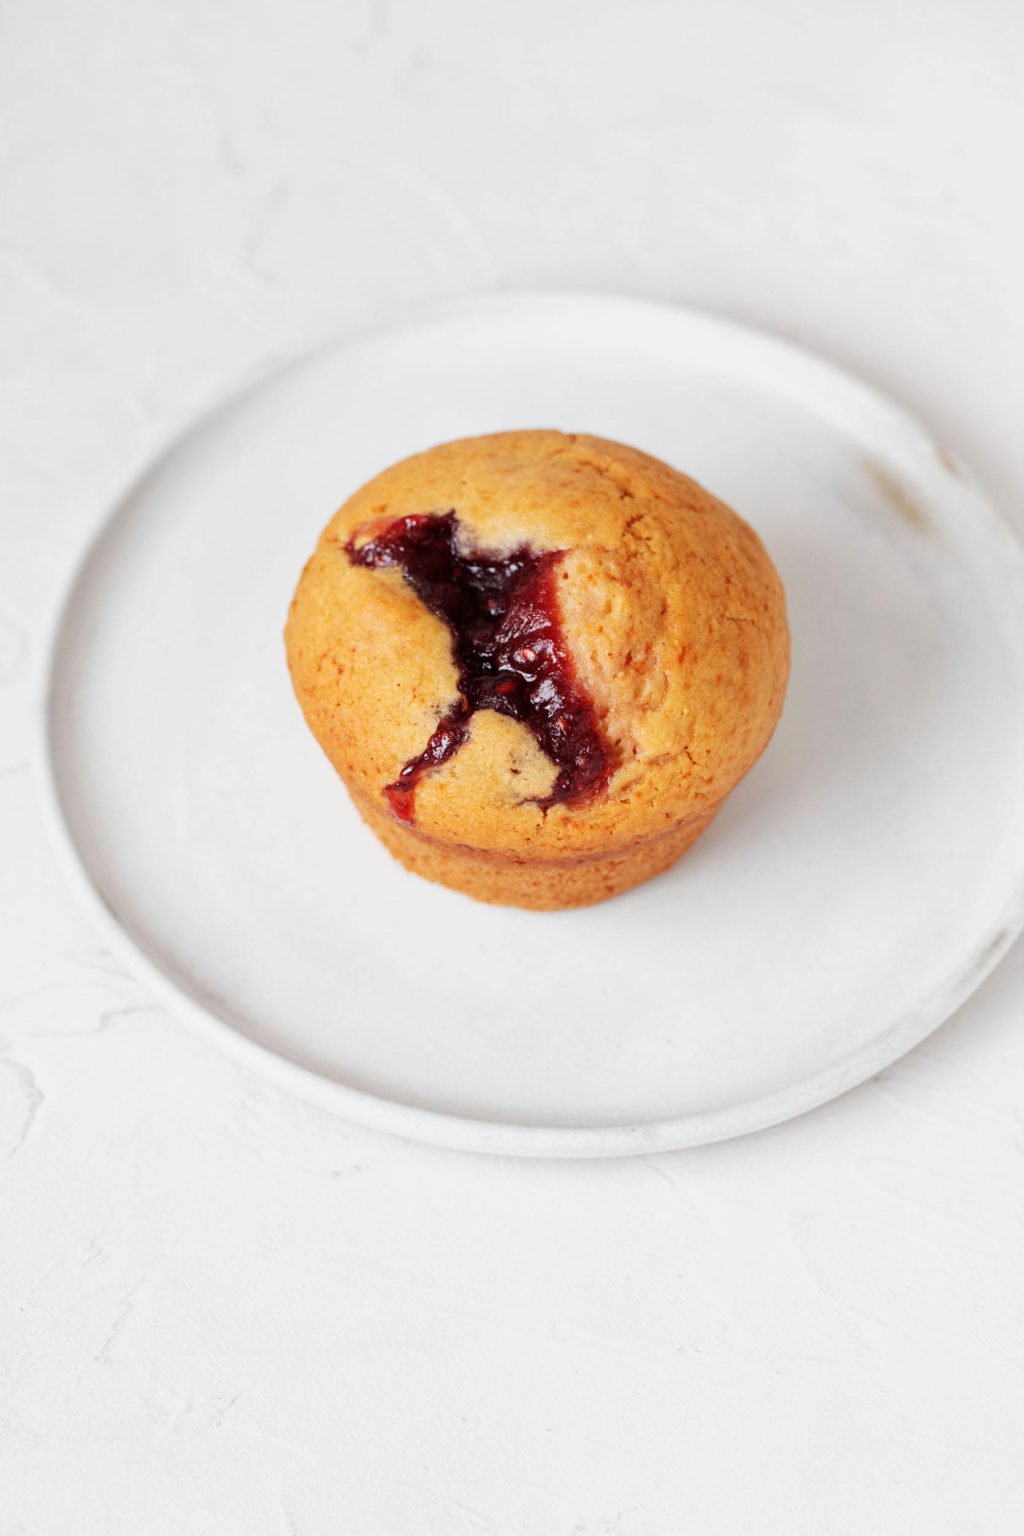 A vegan baked good with raspberry preserves is resting on a small white dessert plate.